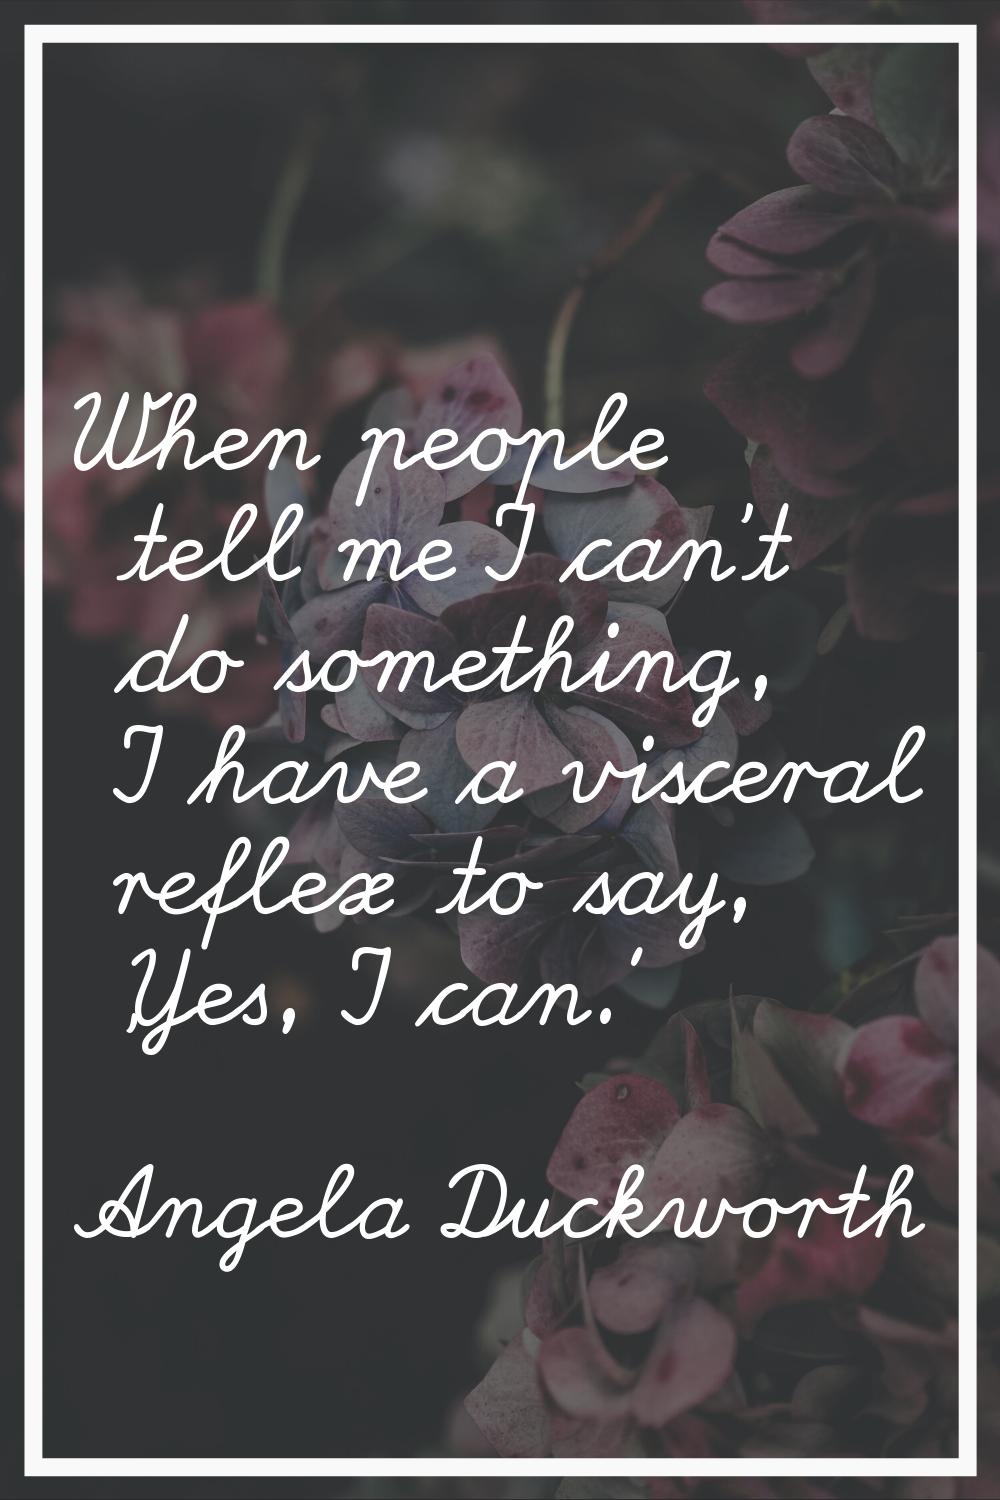 When people tell me I can't do something, I have a visceral reflex to say, 'Yes, I can.'